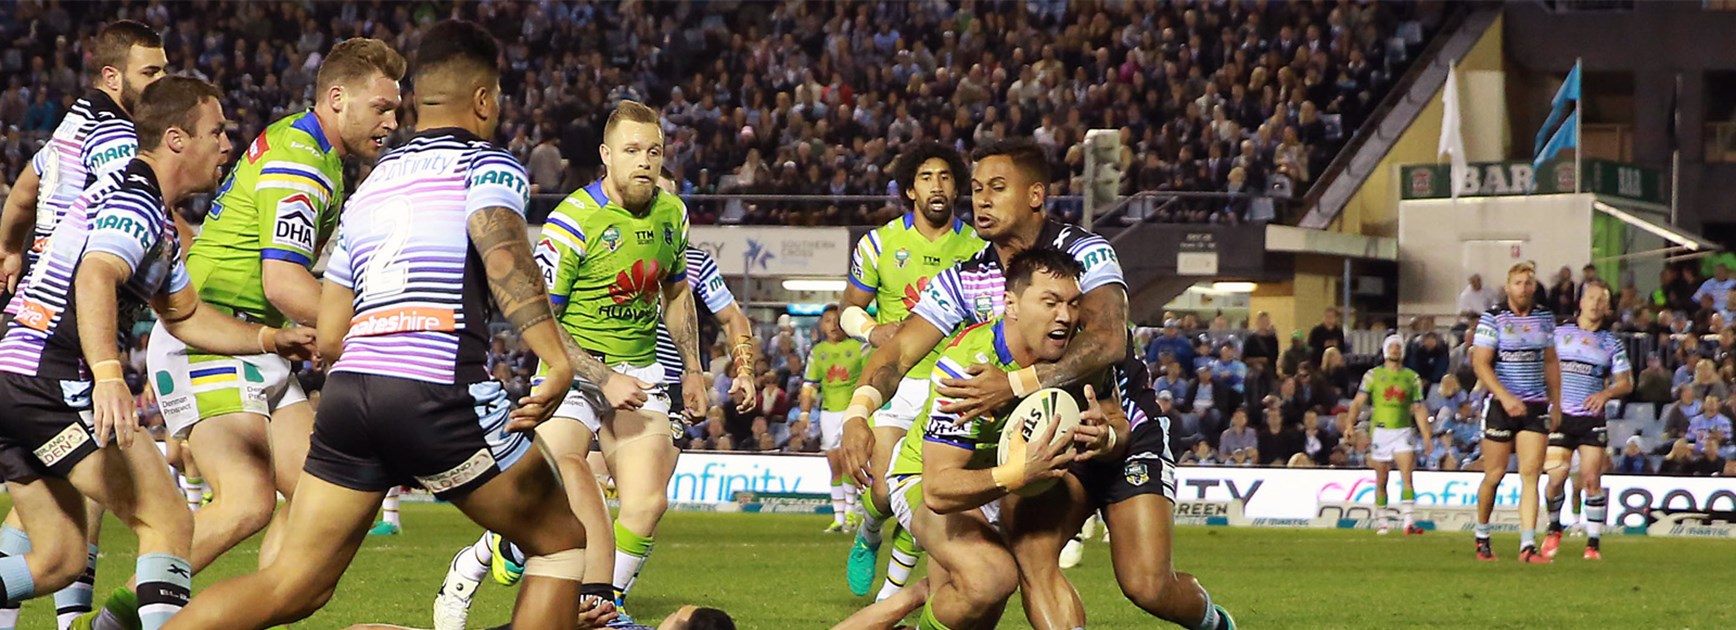 Jordan Rapana finds the tryline for the Raiders against the Sharks in Round 22.